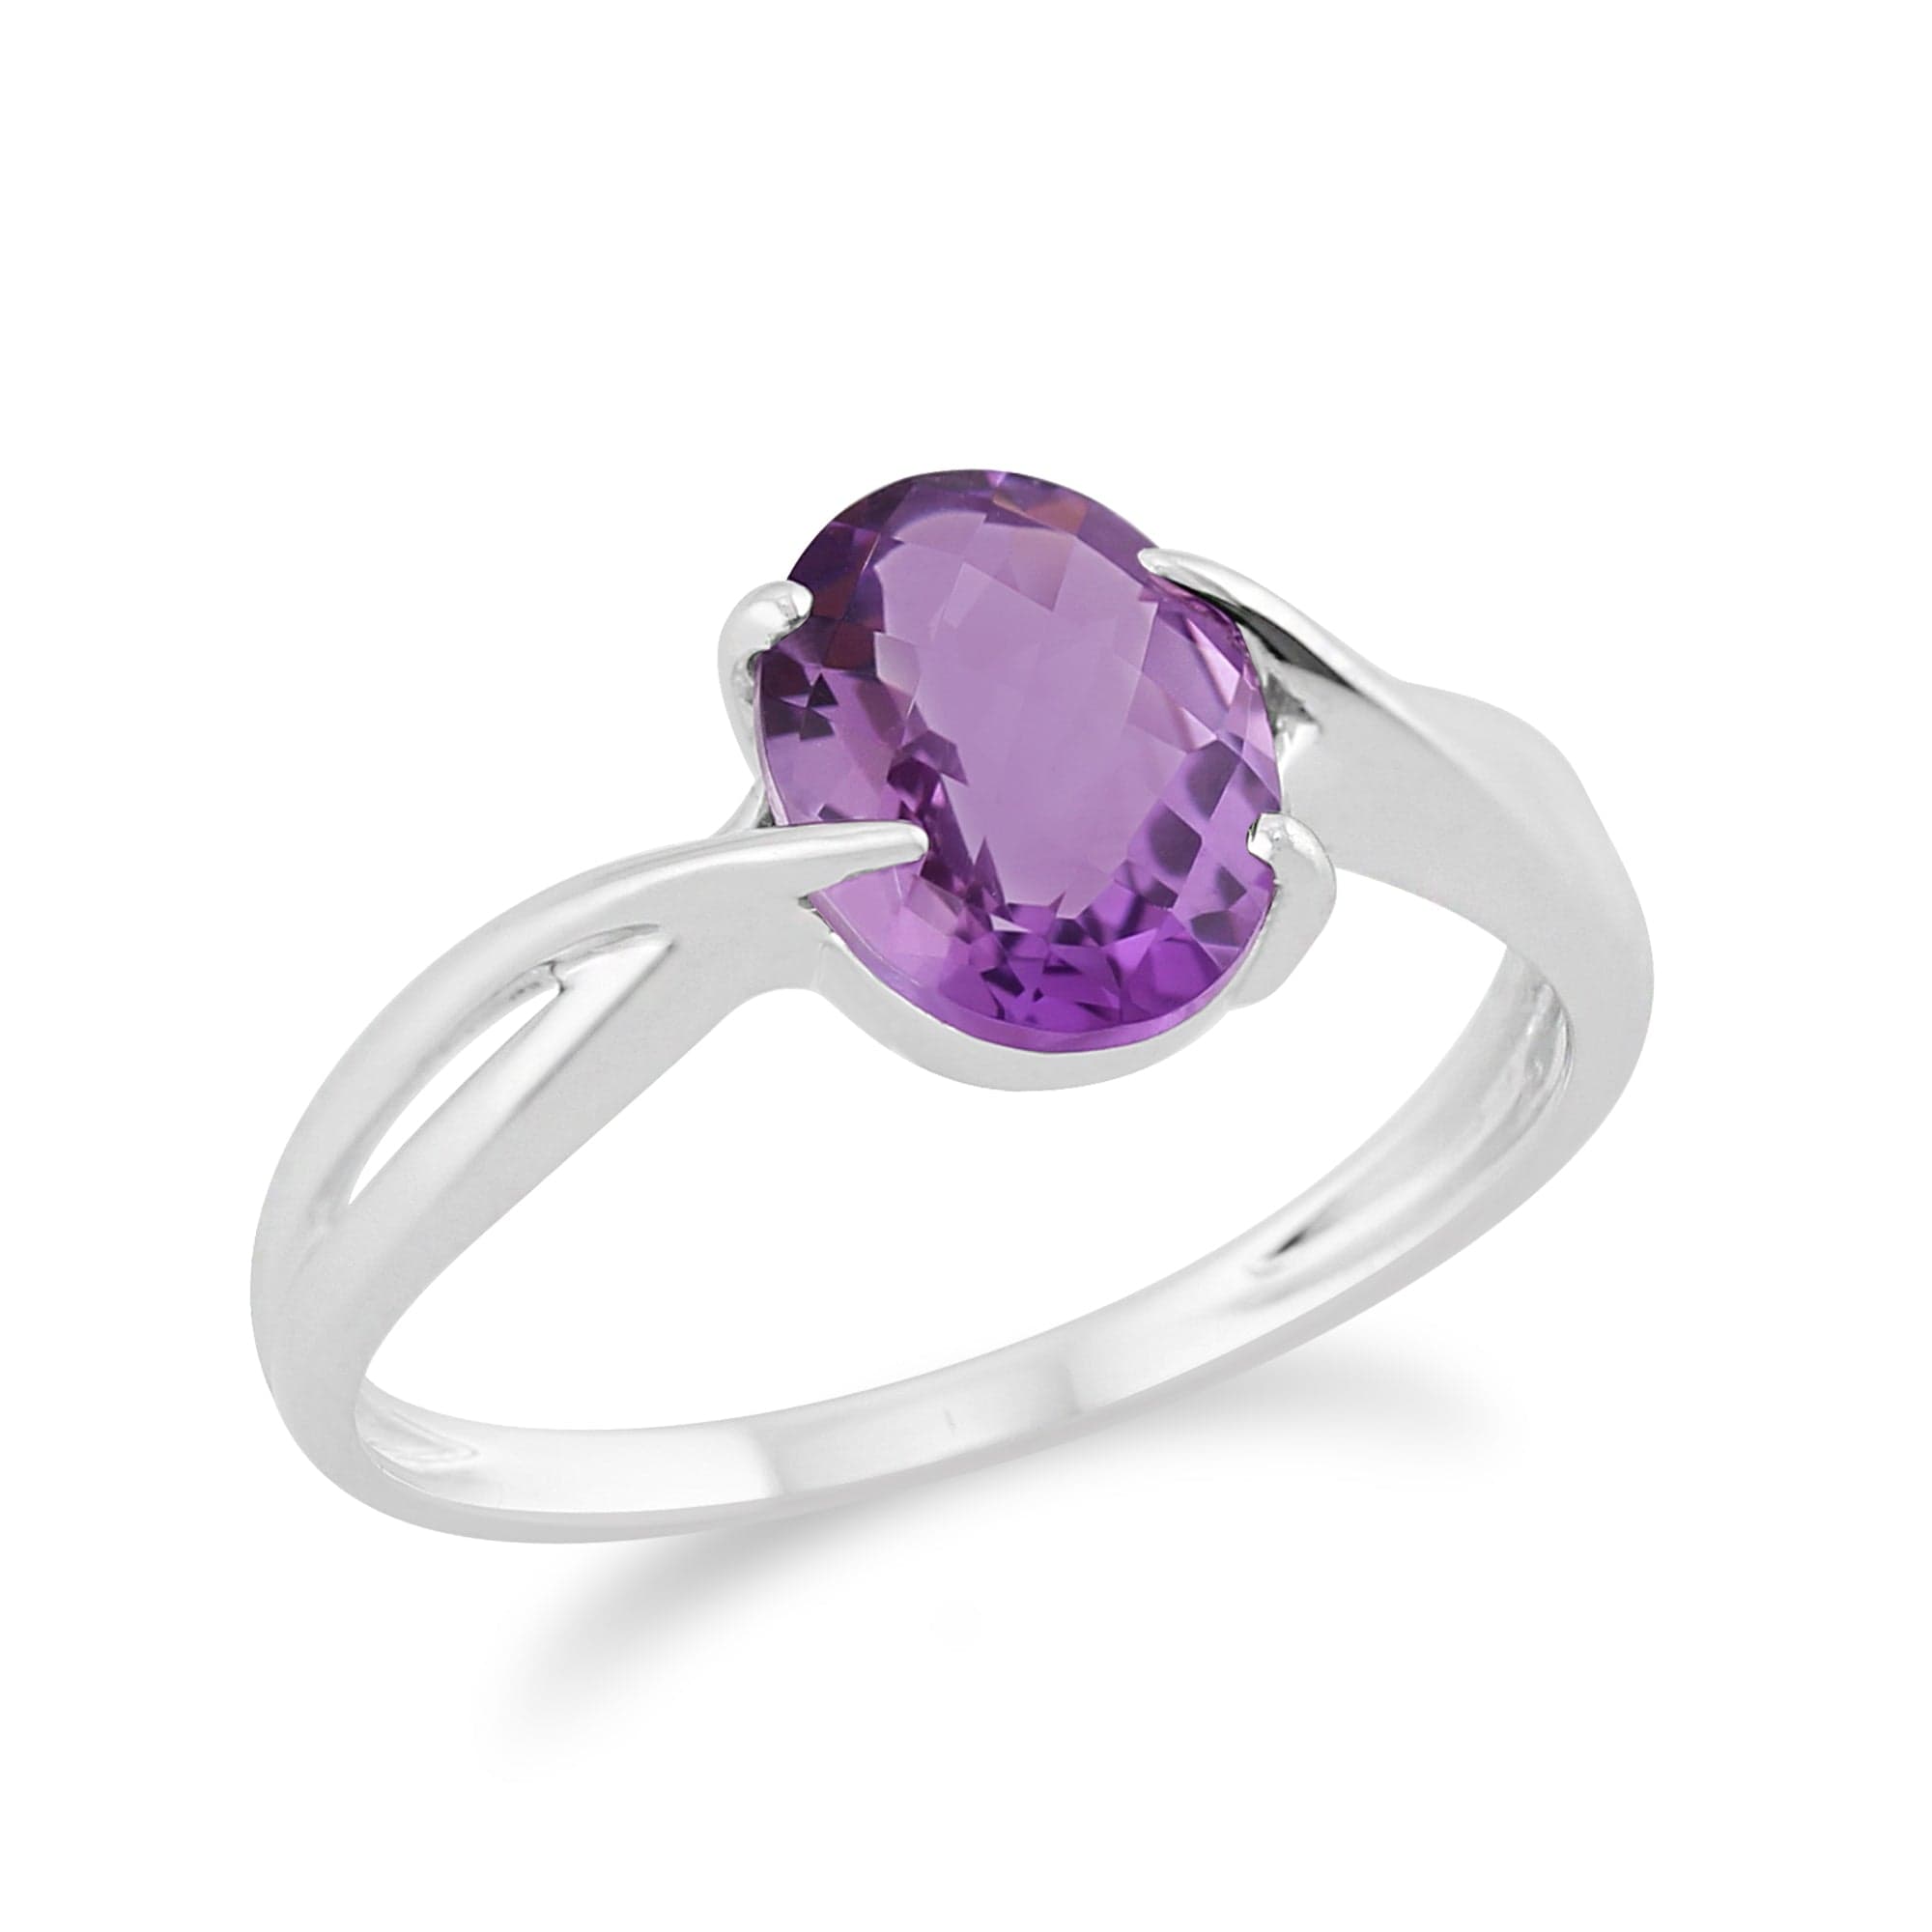 123R0806039 9ct White Gold 1.35ct Natural Amethyst Classic Single Stone Style Ring 2